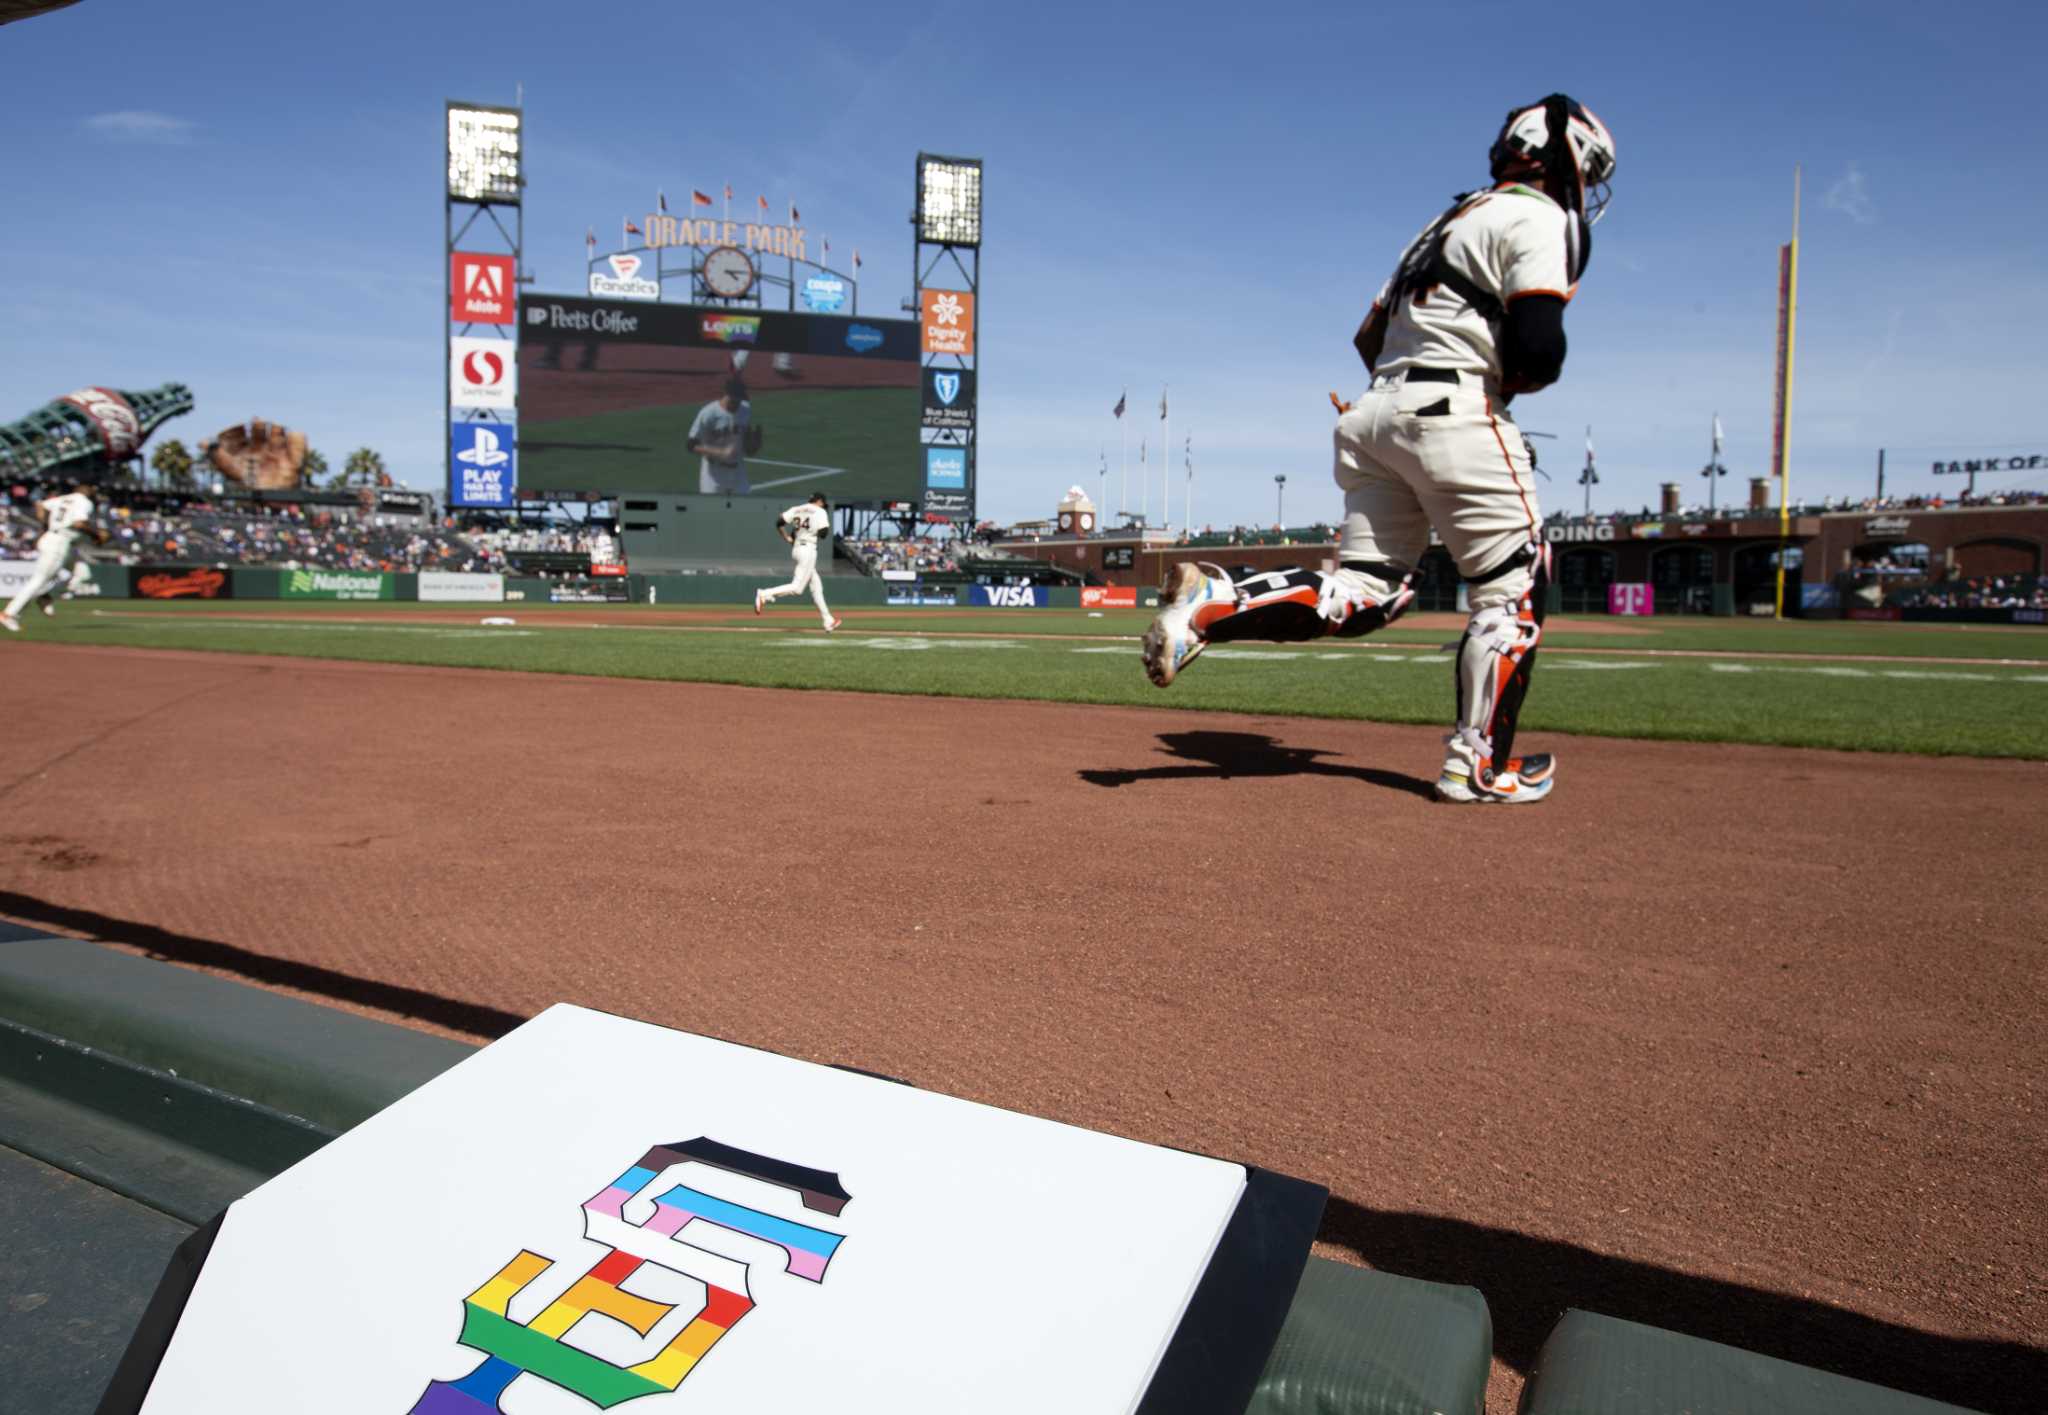 5 Tampa Bay Rays Pitchers Decline to Wear Pride Logo for Annual